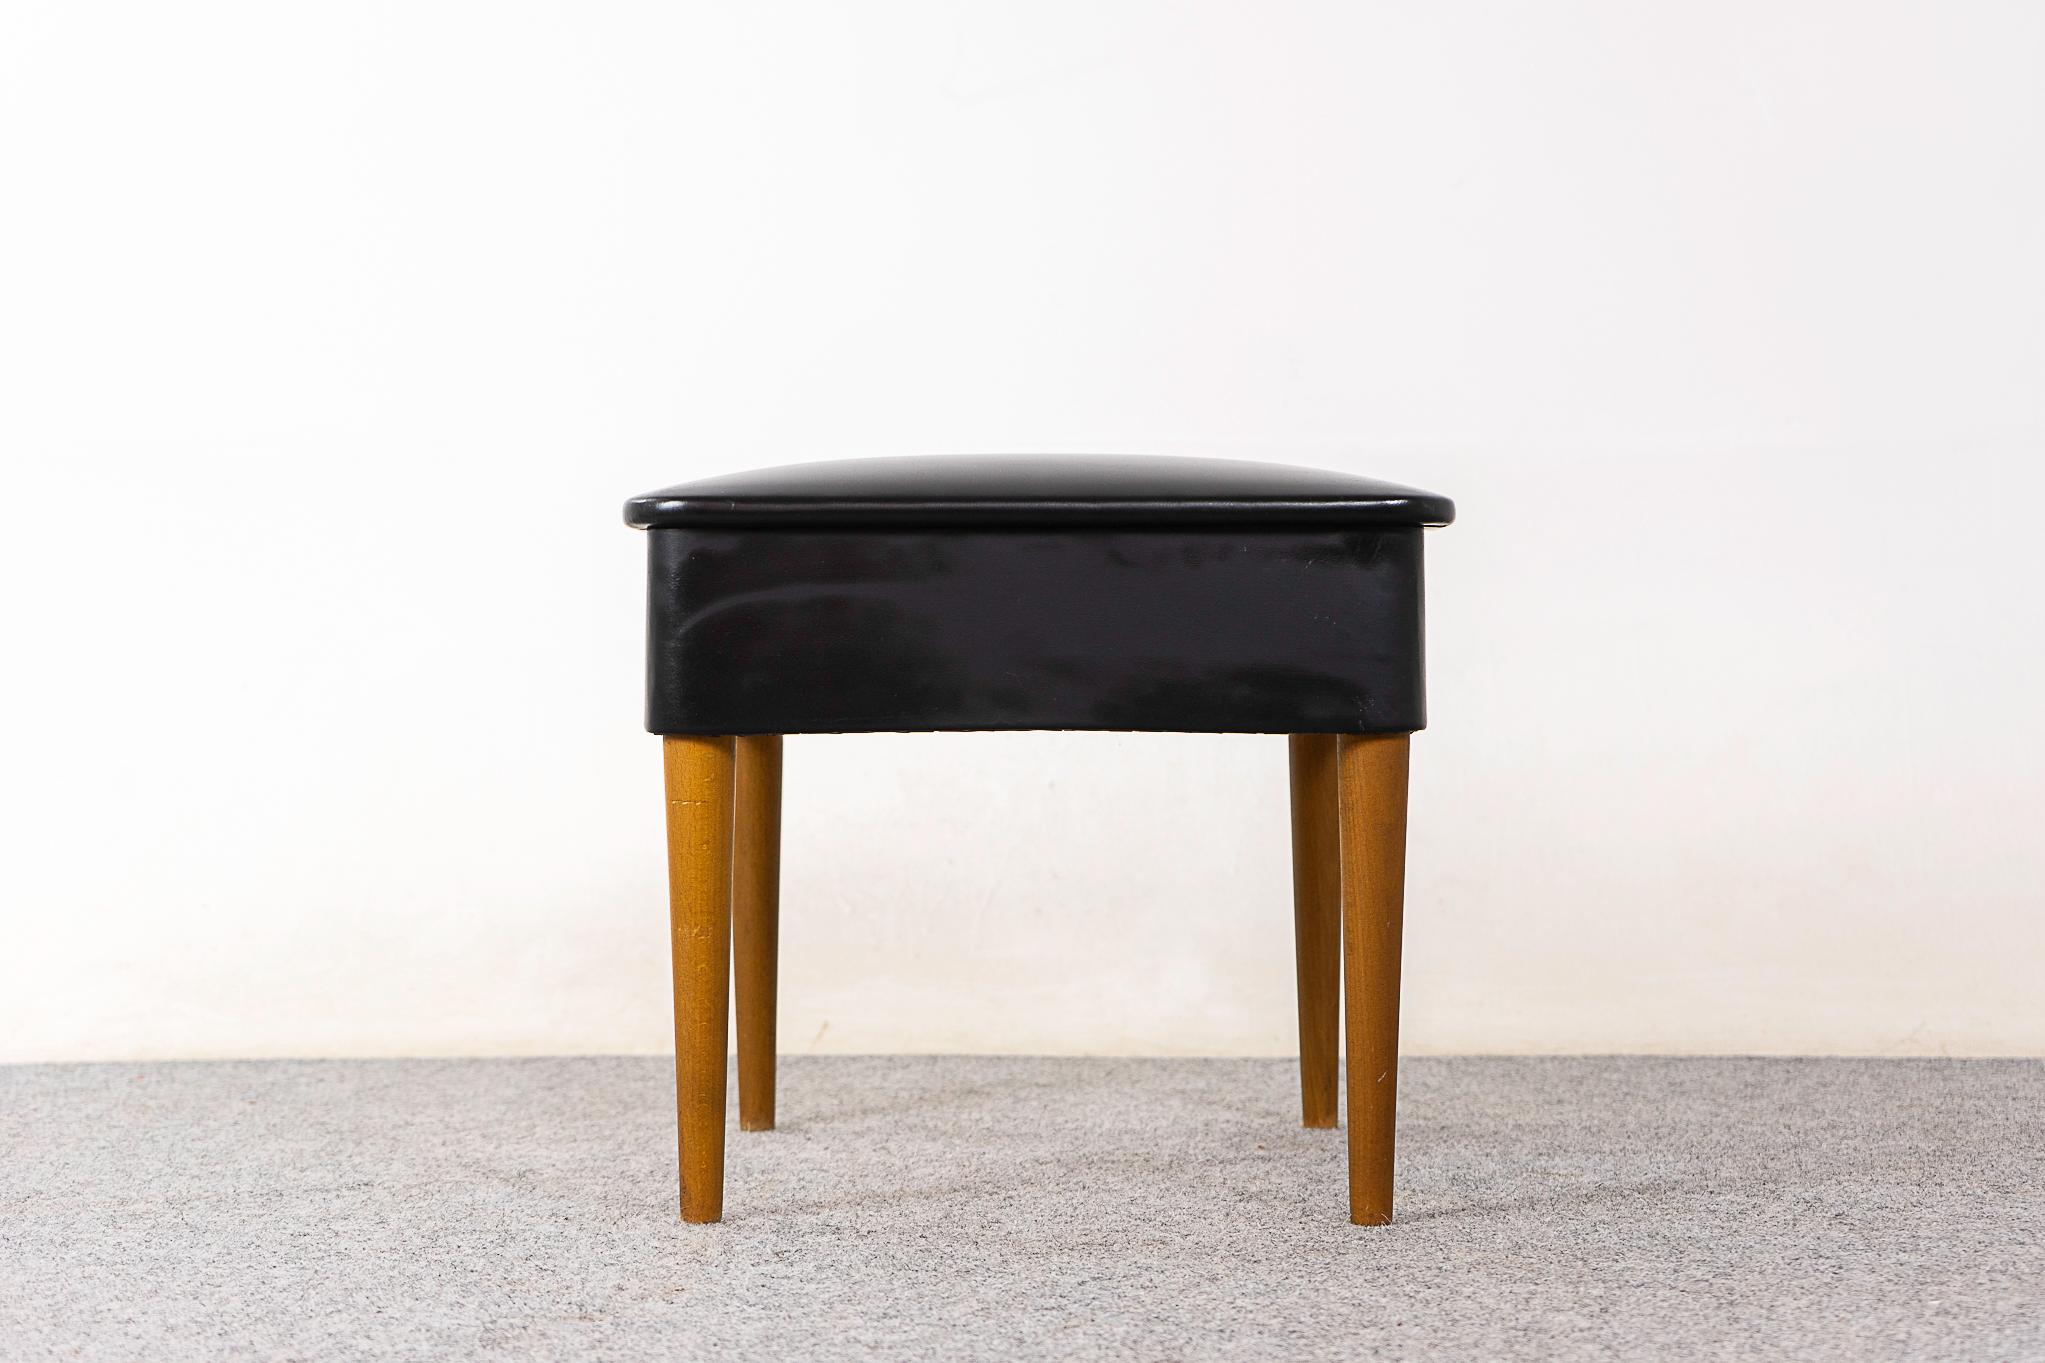 Teak Danish footstool with storage, circa 1960's. Handy flip top divided storage compartment. Tapering, sleek removable legs and original vinyl upholstery. 